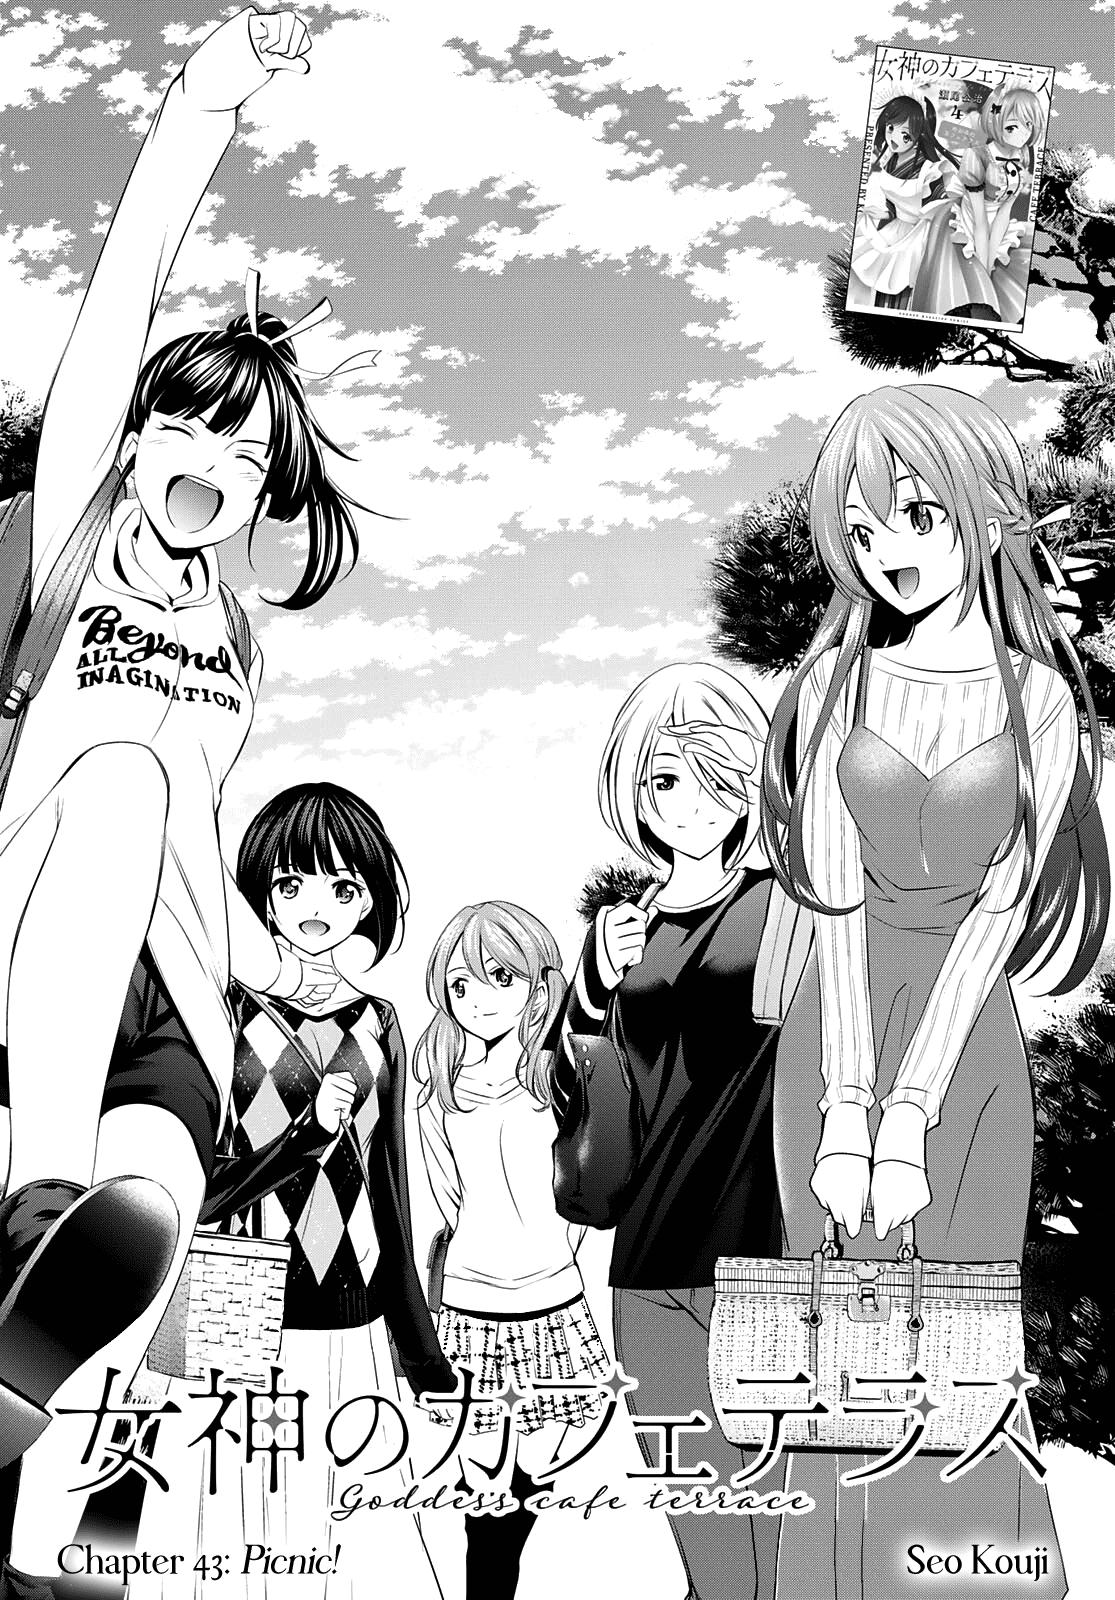 Read Megami no Cafe Terrace Manga Chapter 44 in English Free Online